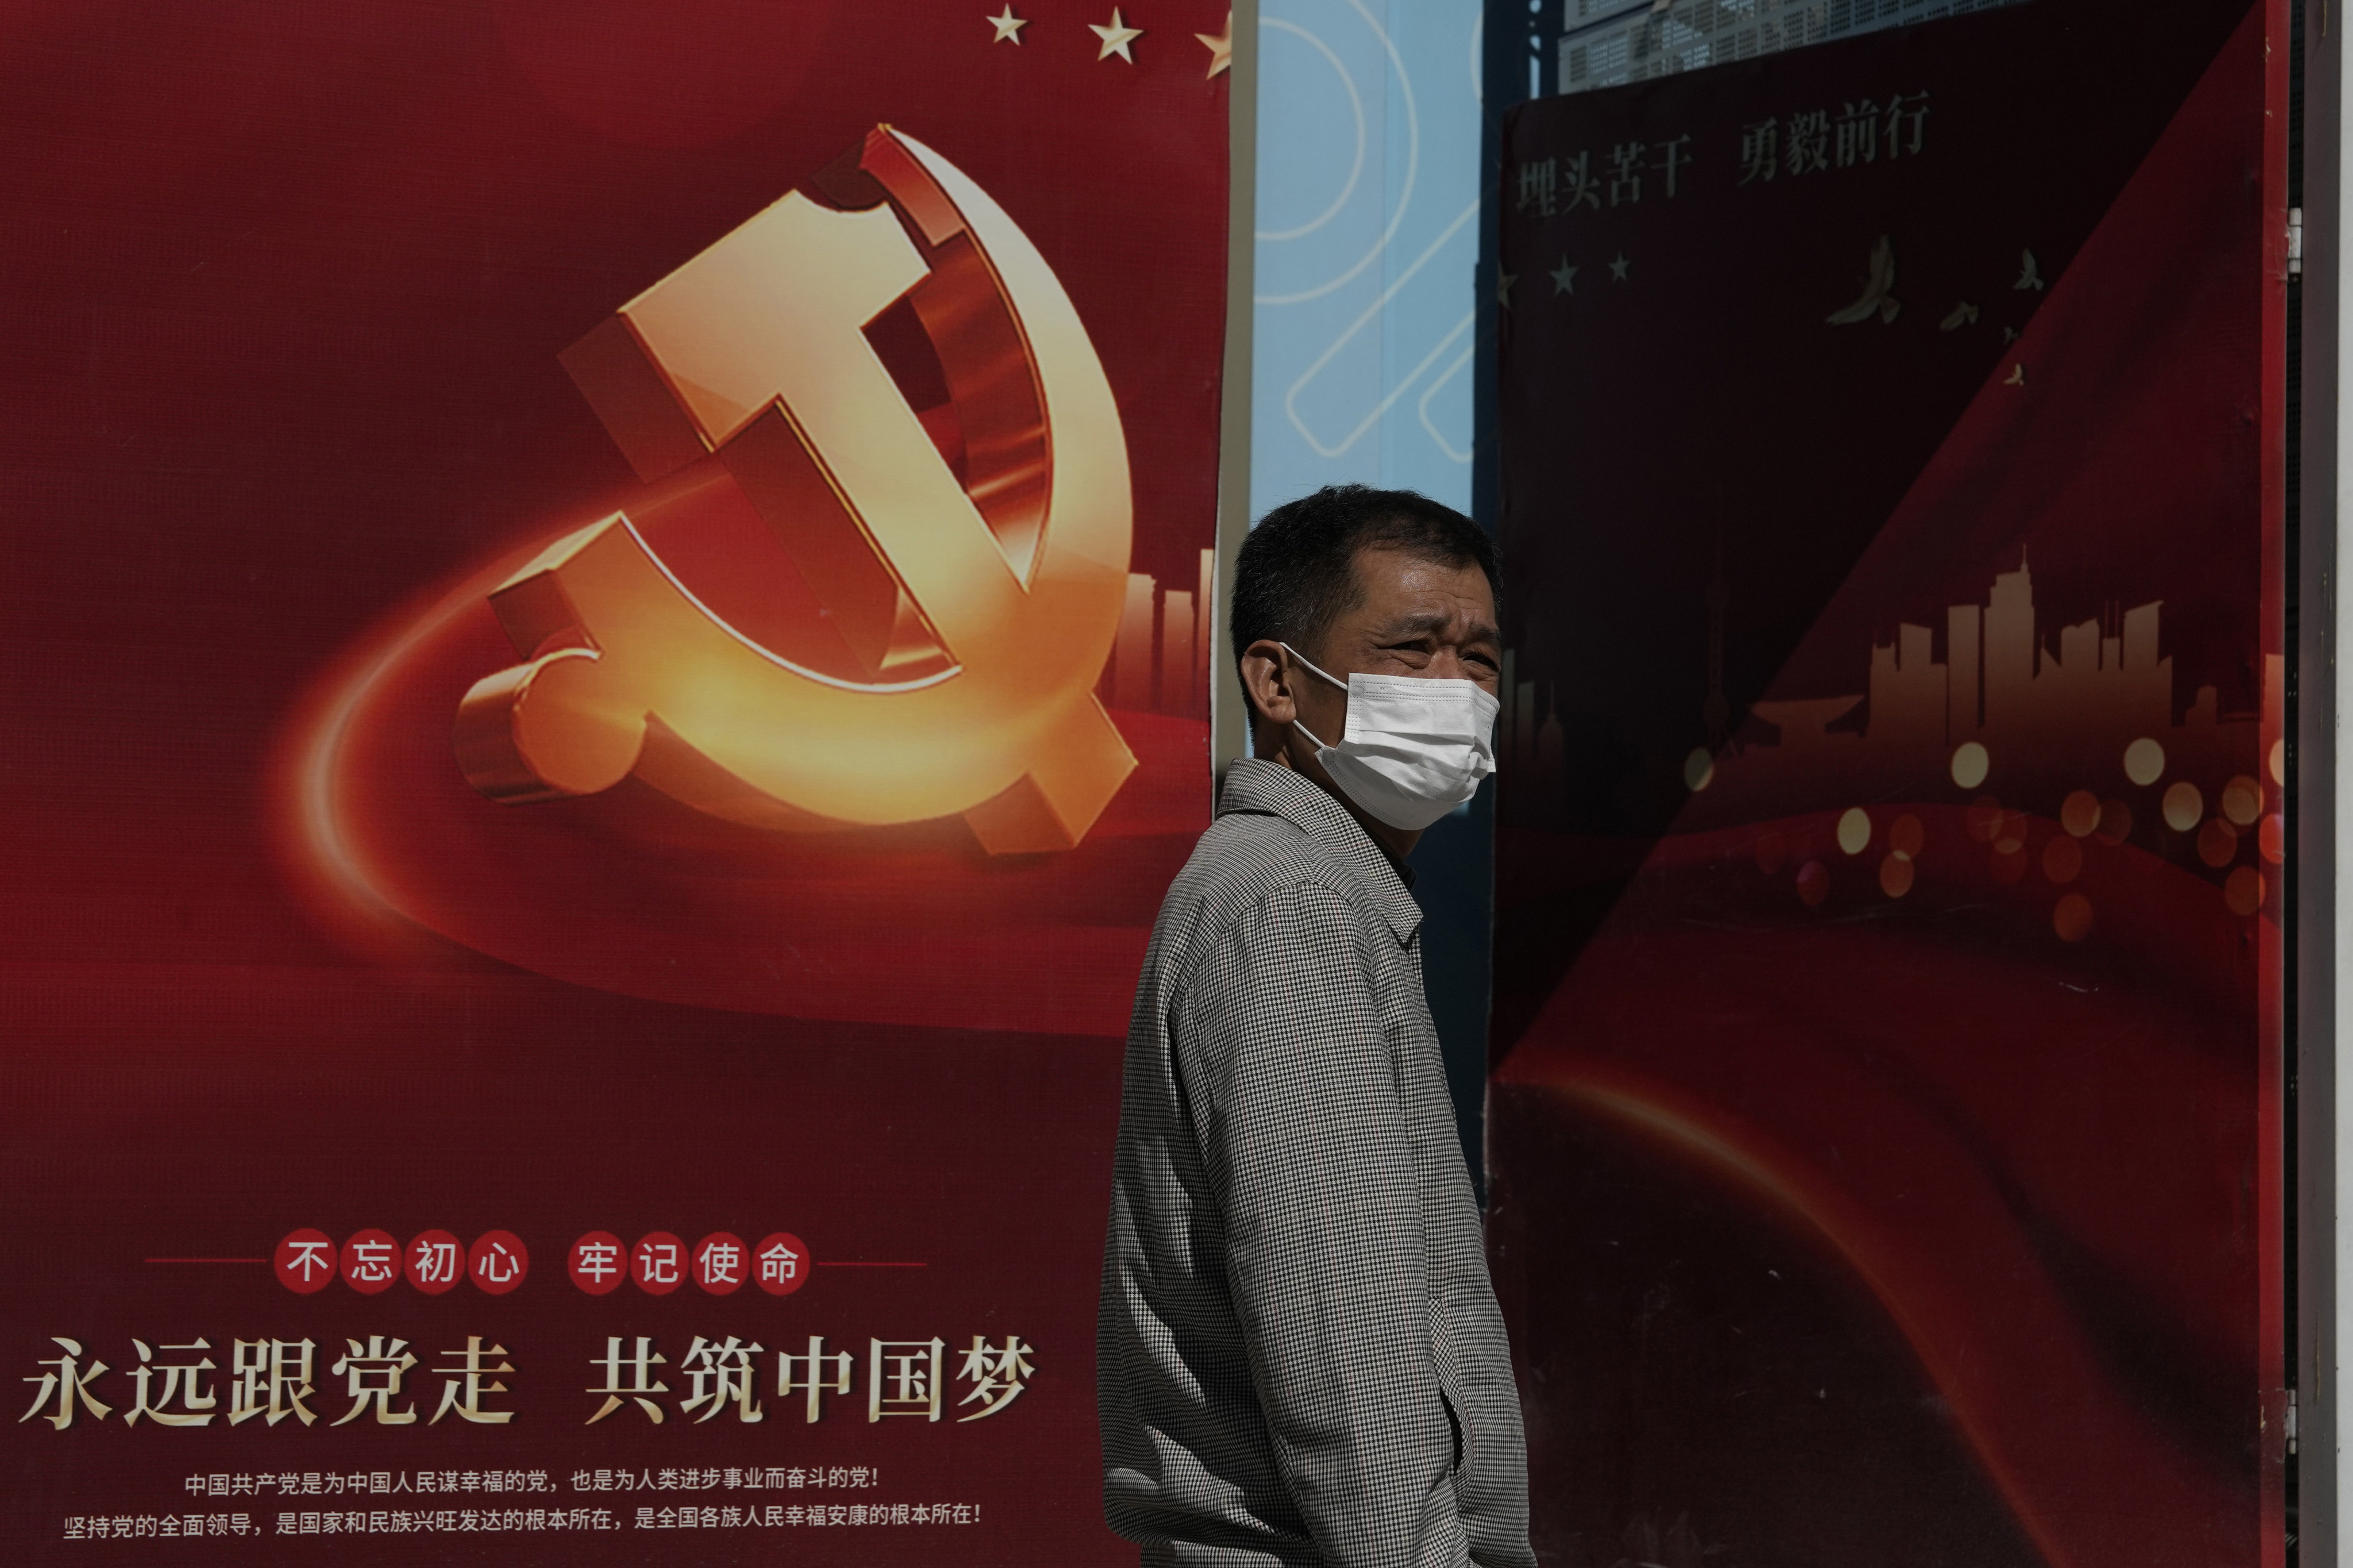 A man passes by a sign for the 20th party congress with the words “Forever follow the party, jointly build the Chinese dream” in Beijing on October 10. President Xi Jinping has called for the “great rejuvenation of the Chinese nation” based on reviving the ruling party’s role as an economic, social and cultural leader. Photo: AP